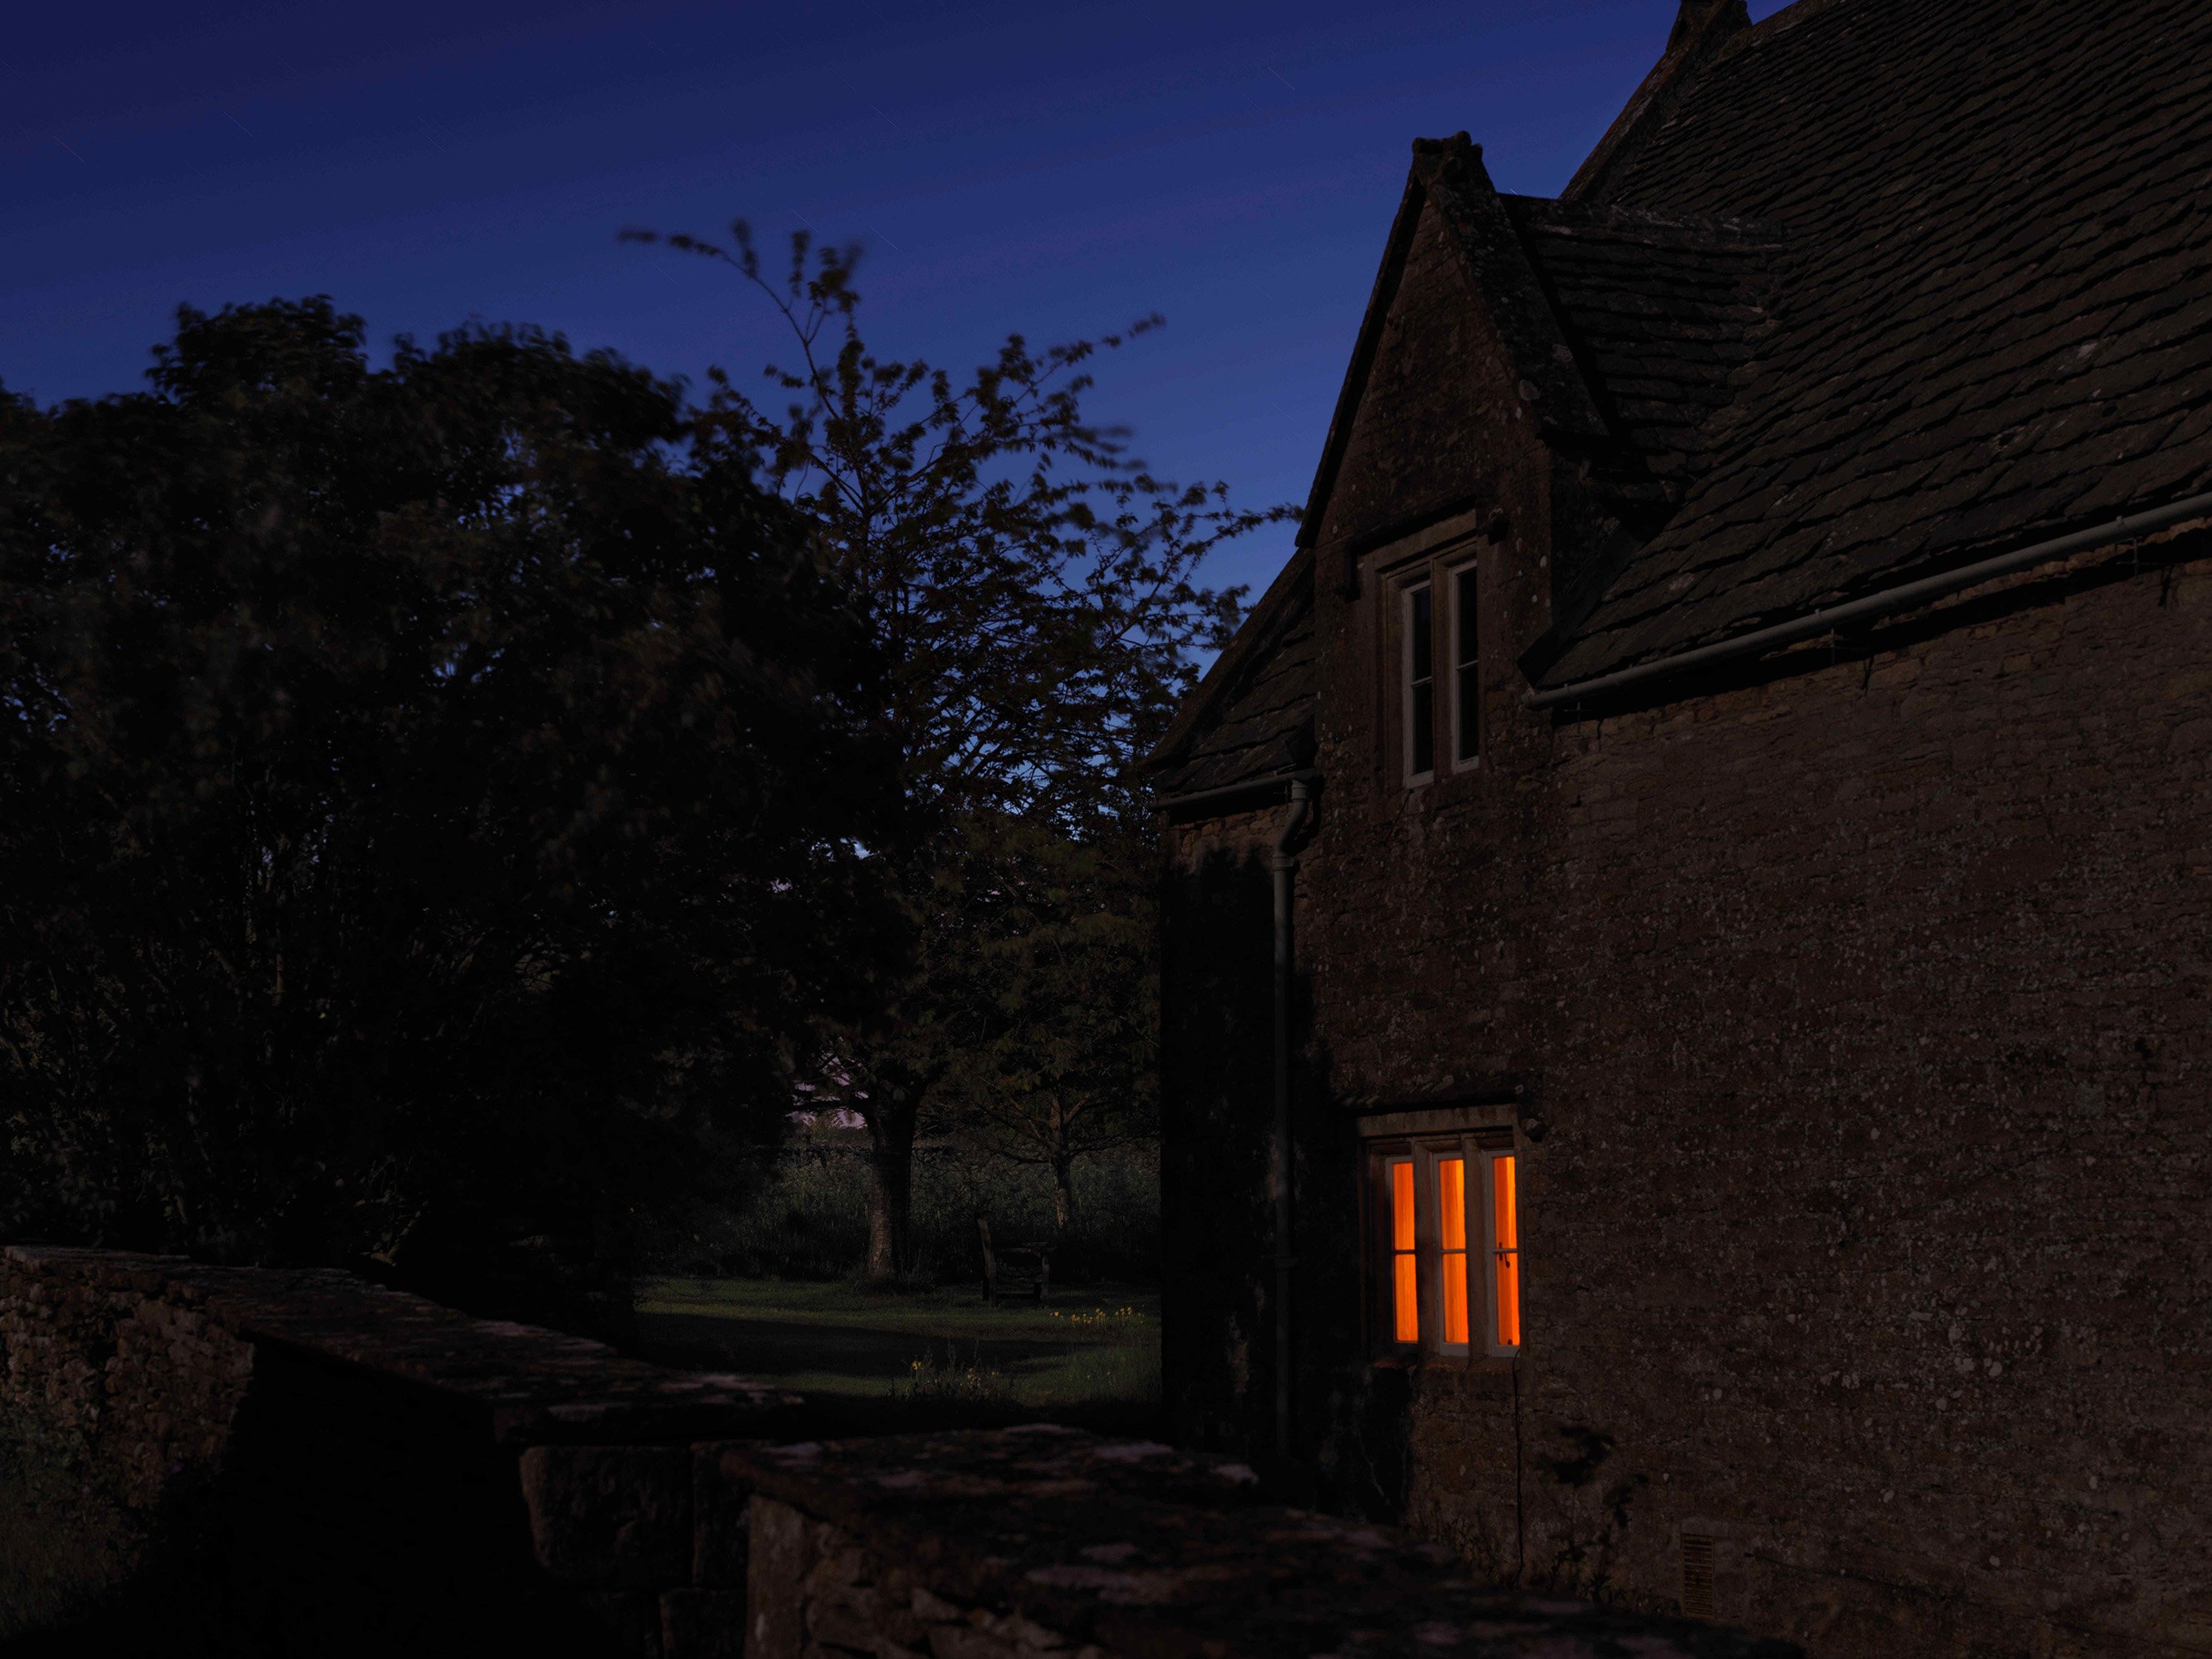 Orange light shines through a window at twilight. The home is made of Cotswold stone.